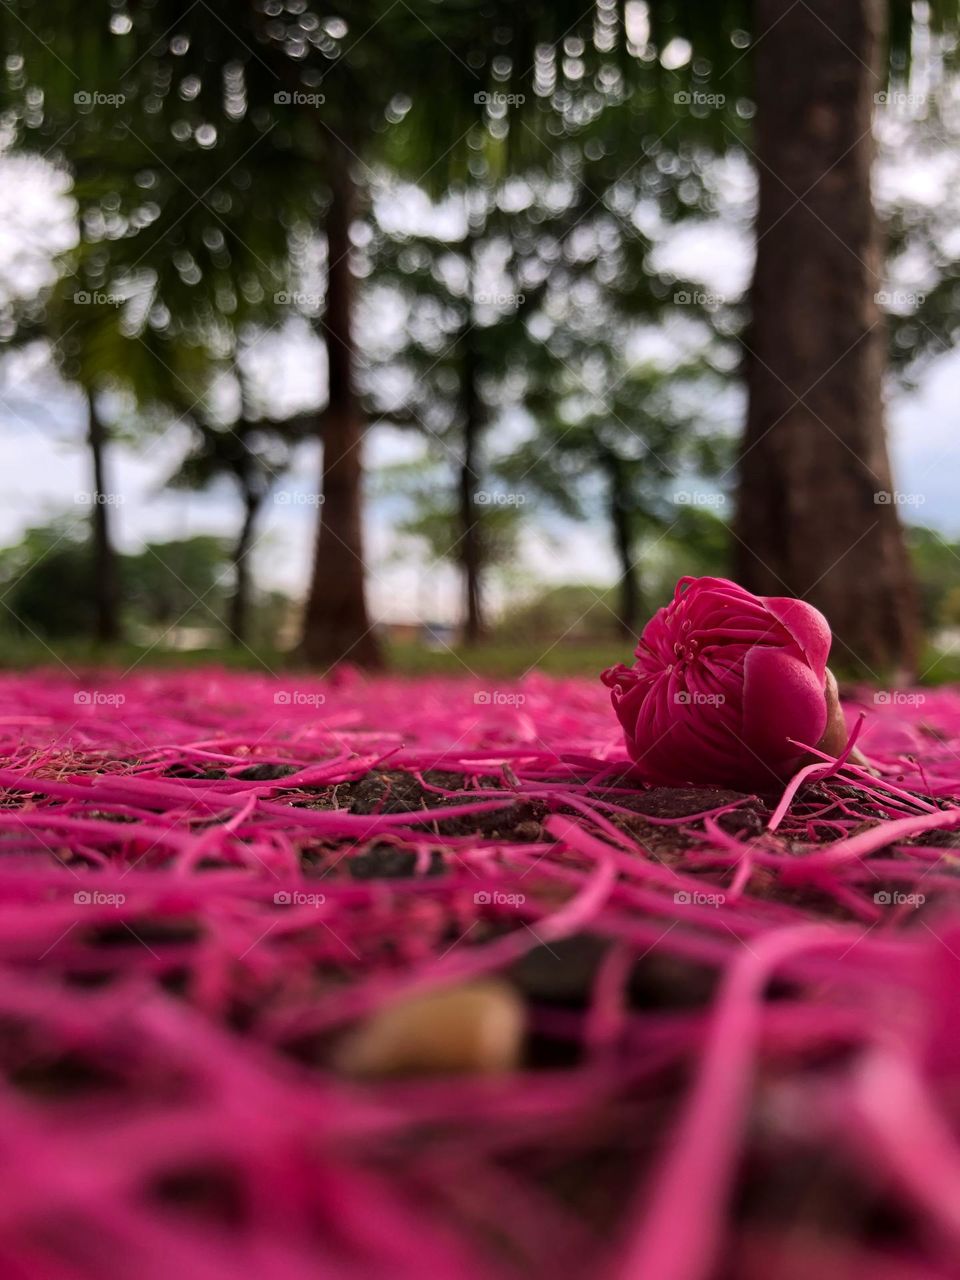 This is a natural pink carpet under a Jambo tree in a Brazilian park during spring. 